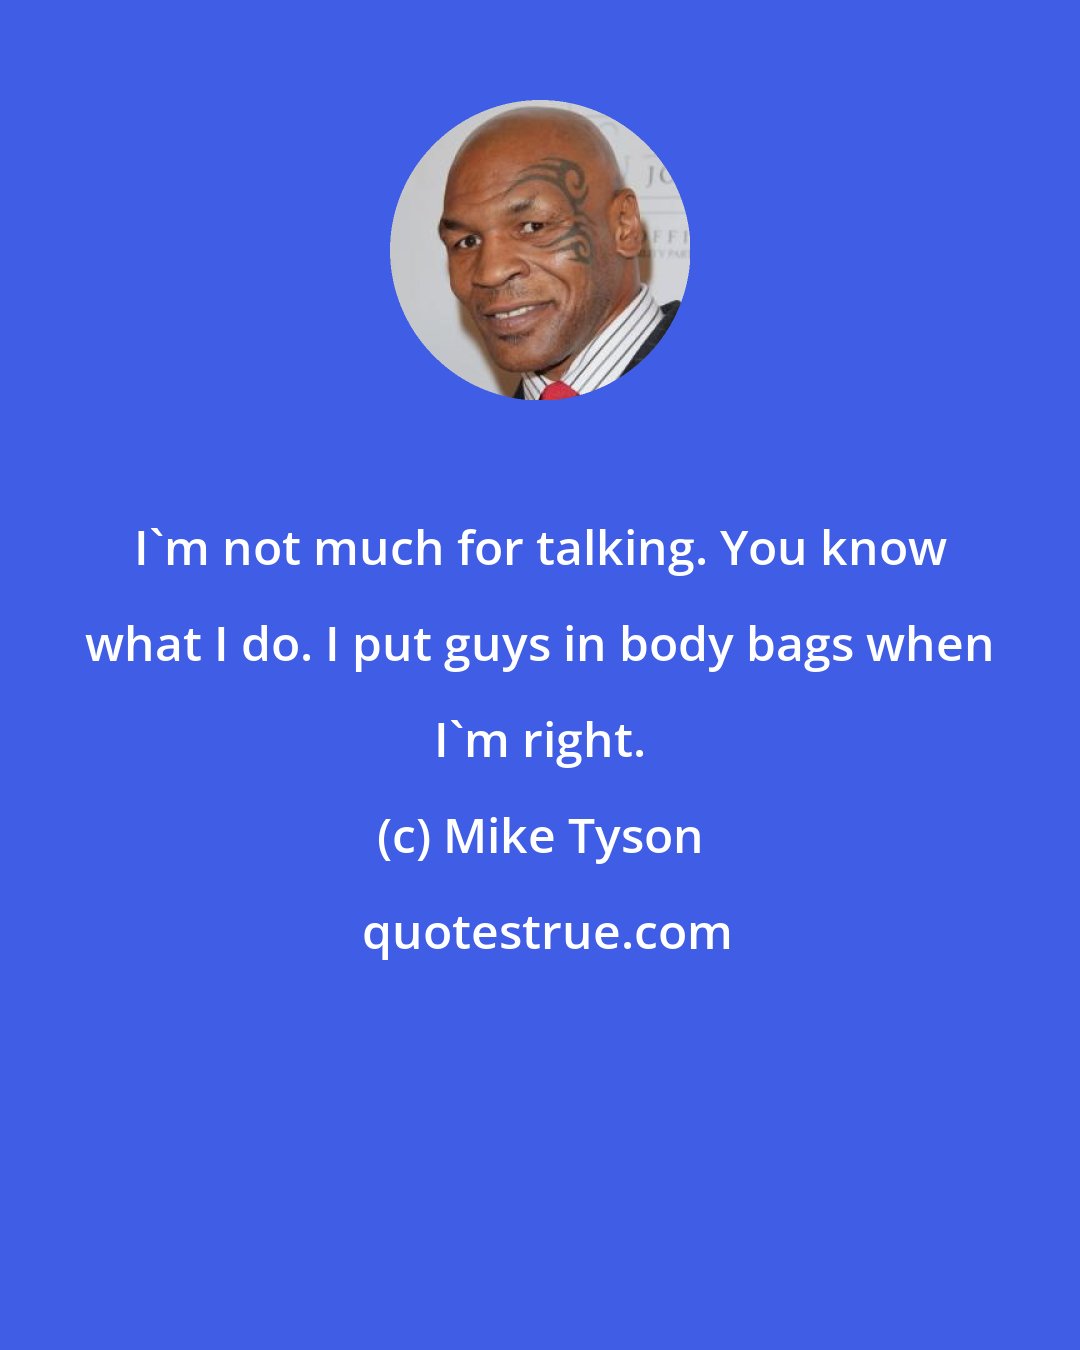 Mike Tyson: I'm not much for talking. You know what I do. I put guys in body bags when I'm right.